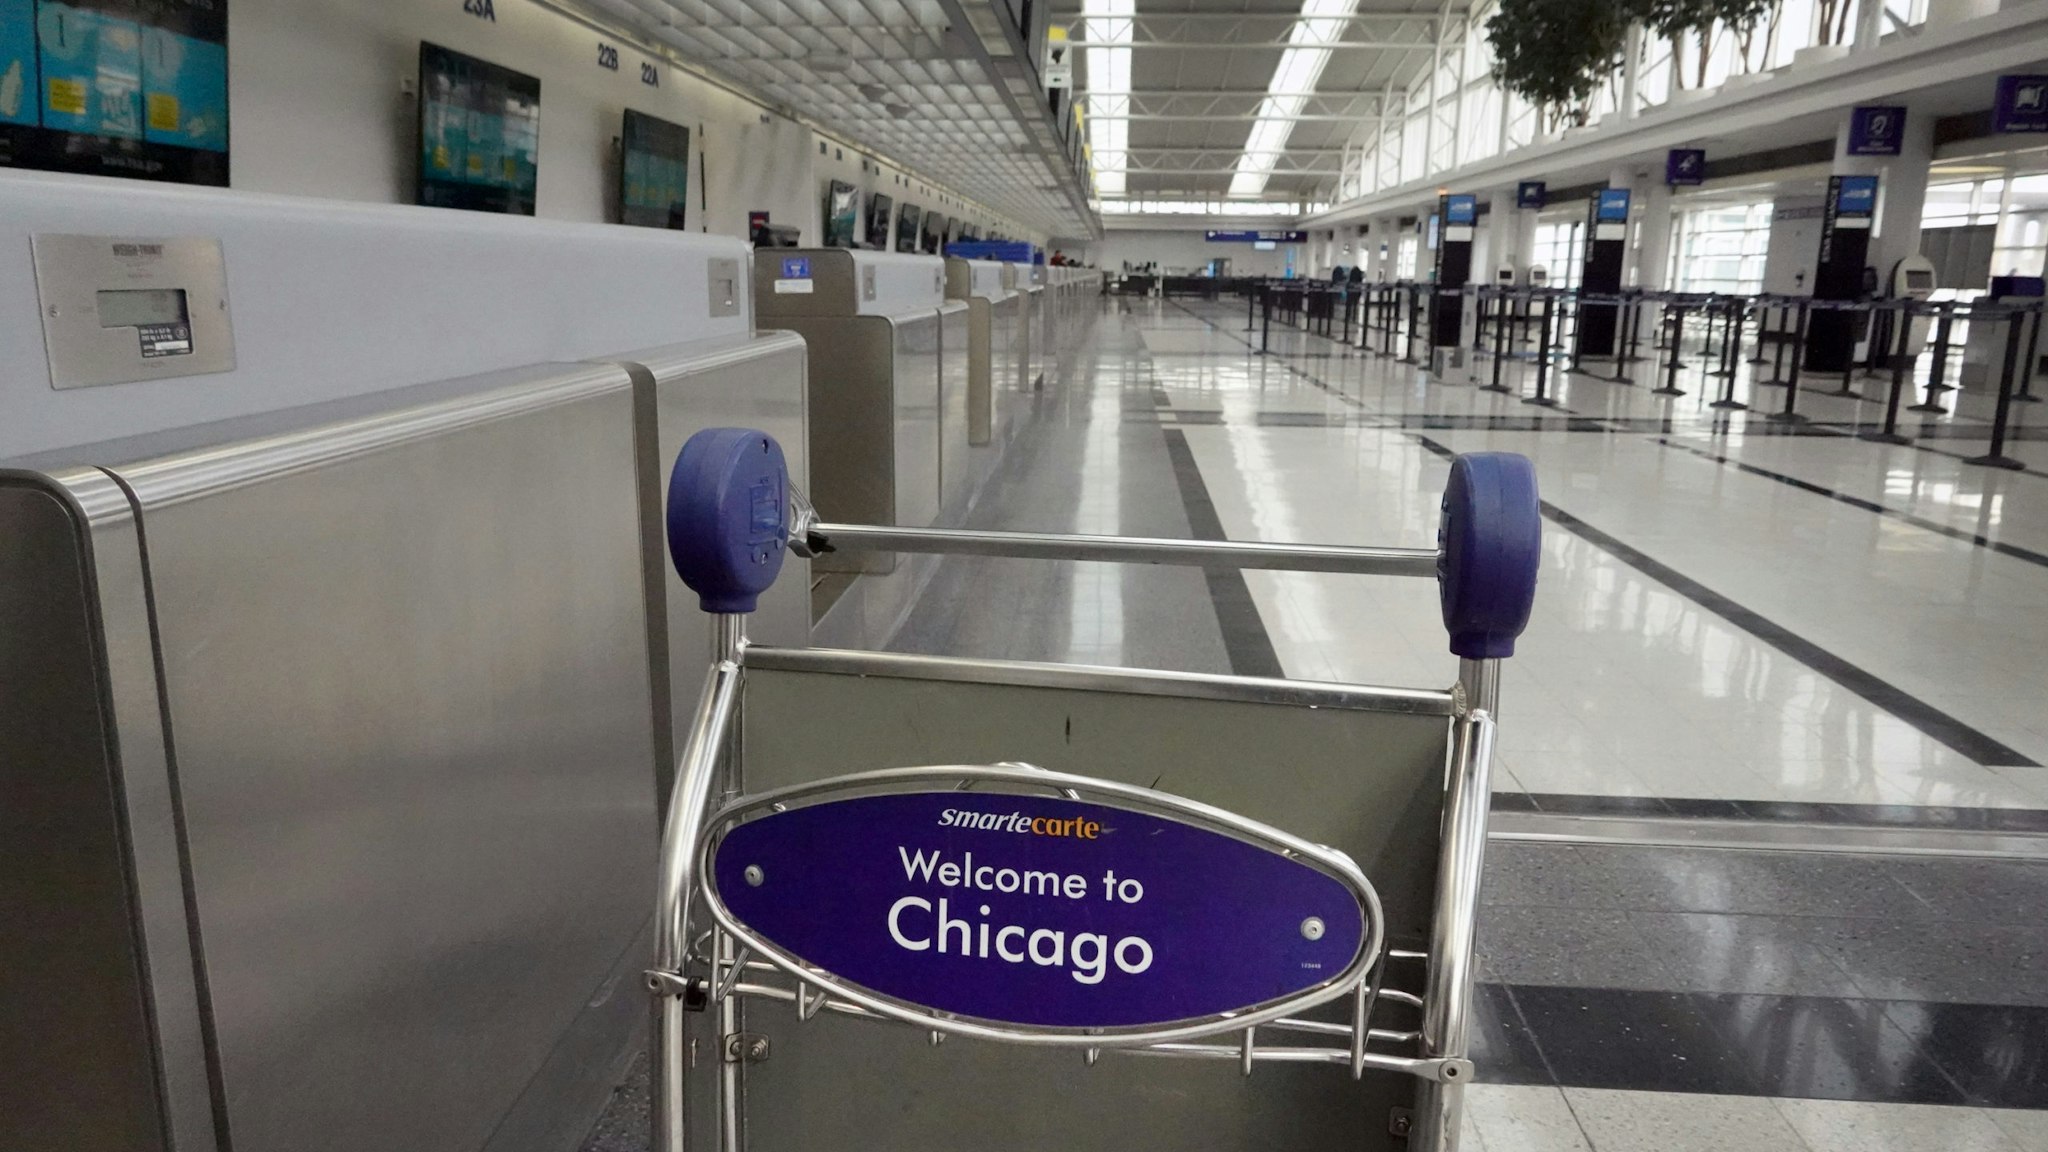 CHICAGO, ILLINOIS - MARCH 12: The international terminal at O'Hare Airport is nearly devoid of travelers on March 12, 2020 in Chicago, Illinois. Yesterday President Donald Trump announced a travel ban for European travelers coming into the U.S. for the next 30 days in an attempt to stem the proliferation of the COVID-19 pandemic. (Photo by Scott Olson/Getty Images)